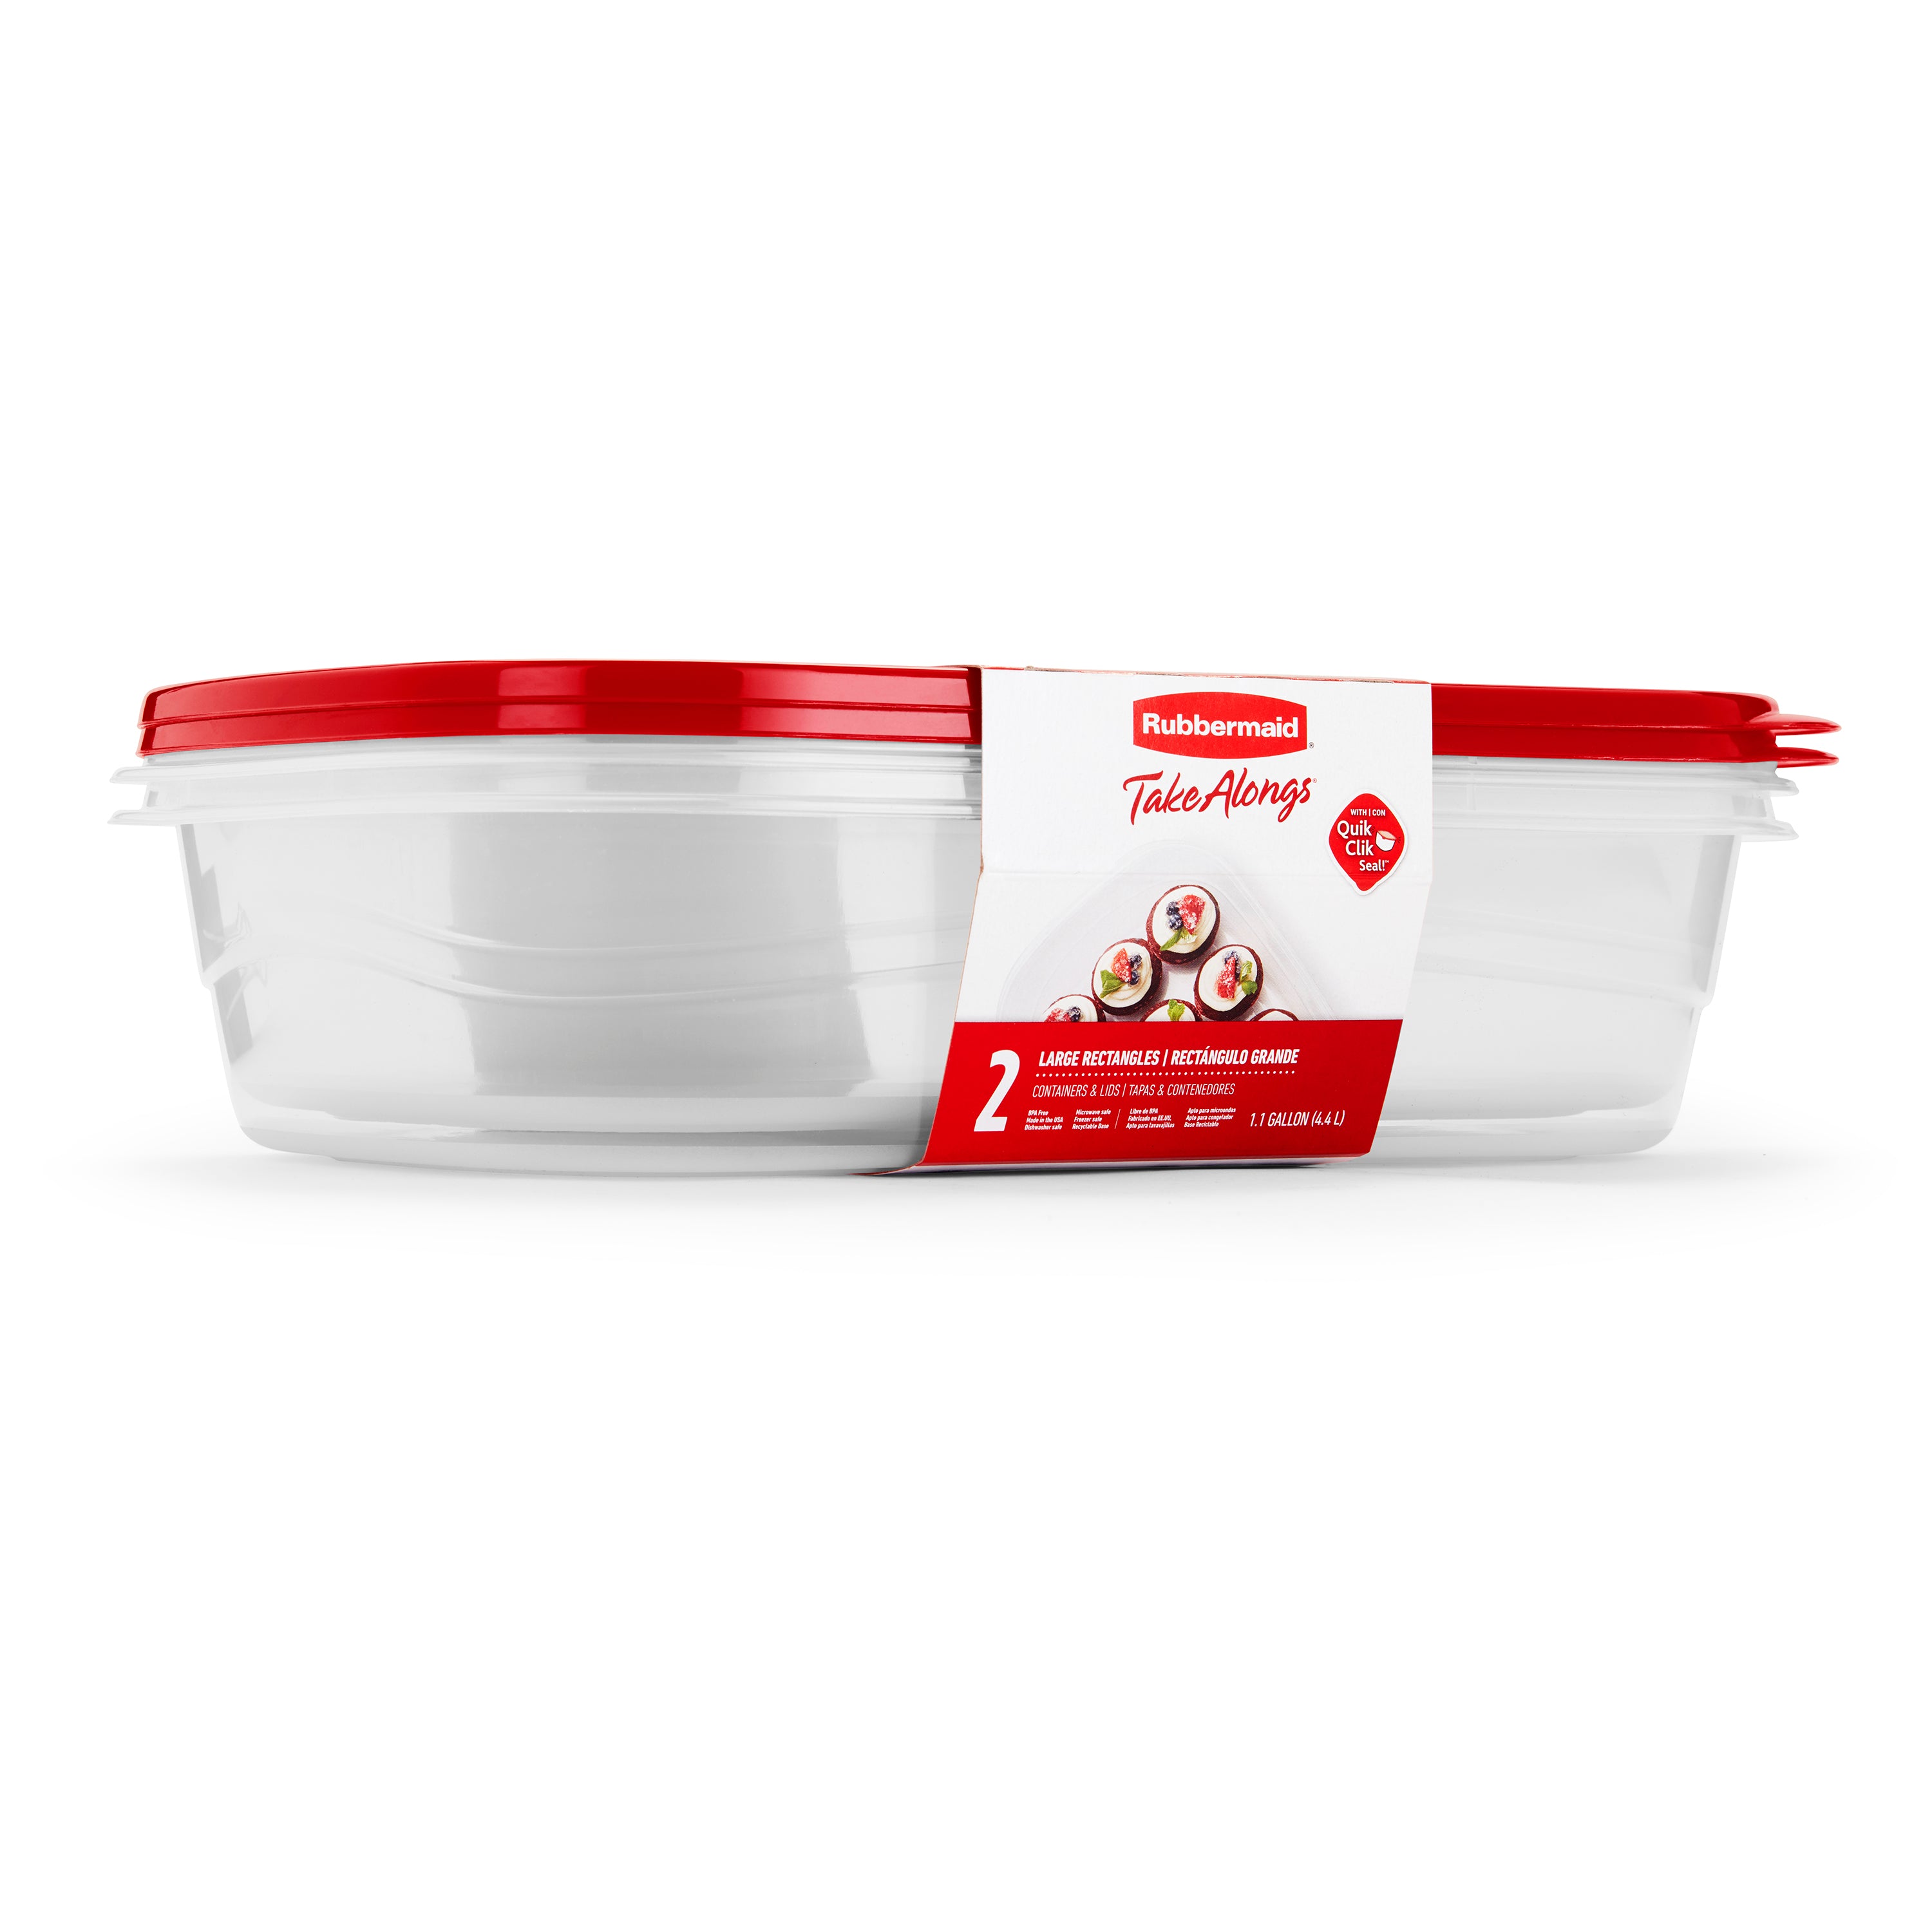 Rubbermaid Takealongs food storage container 4.4 (2 pack)